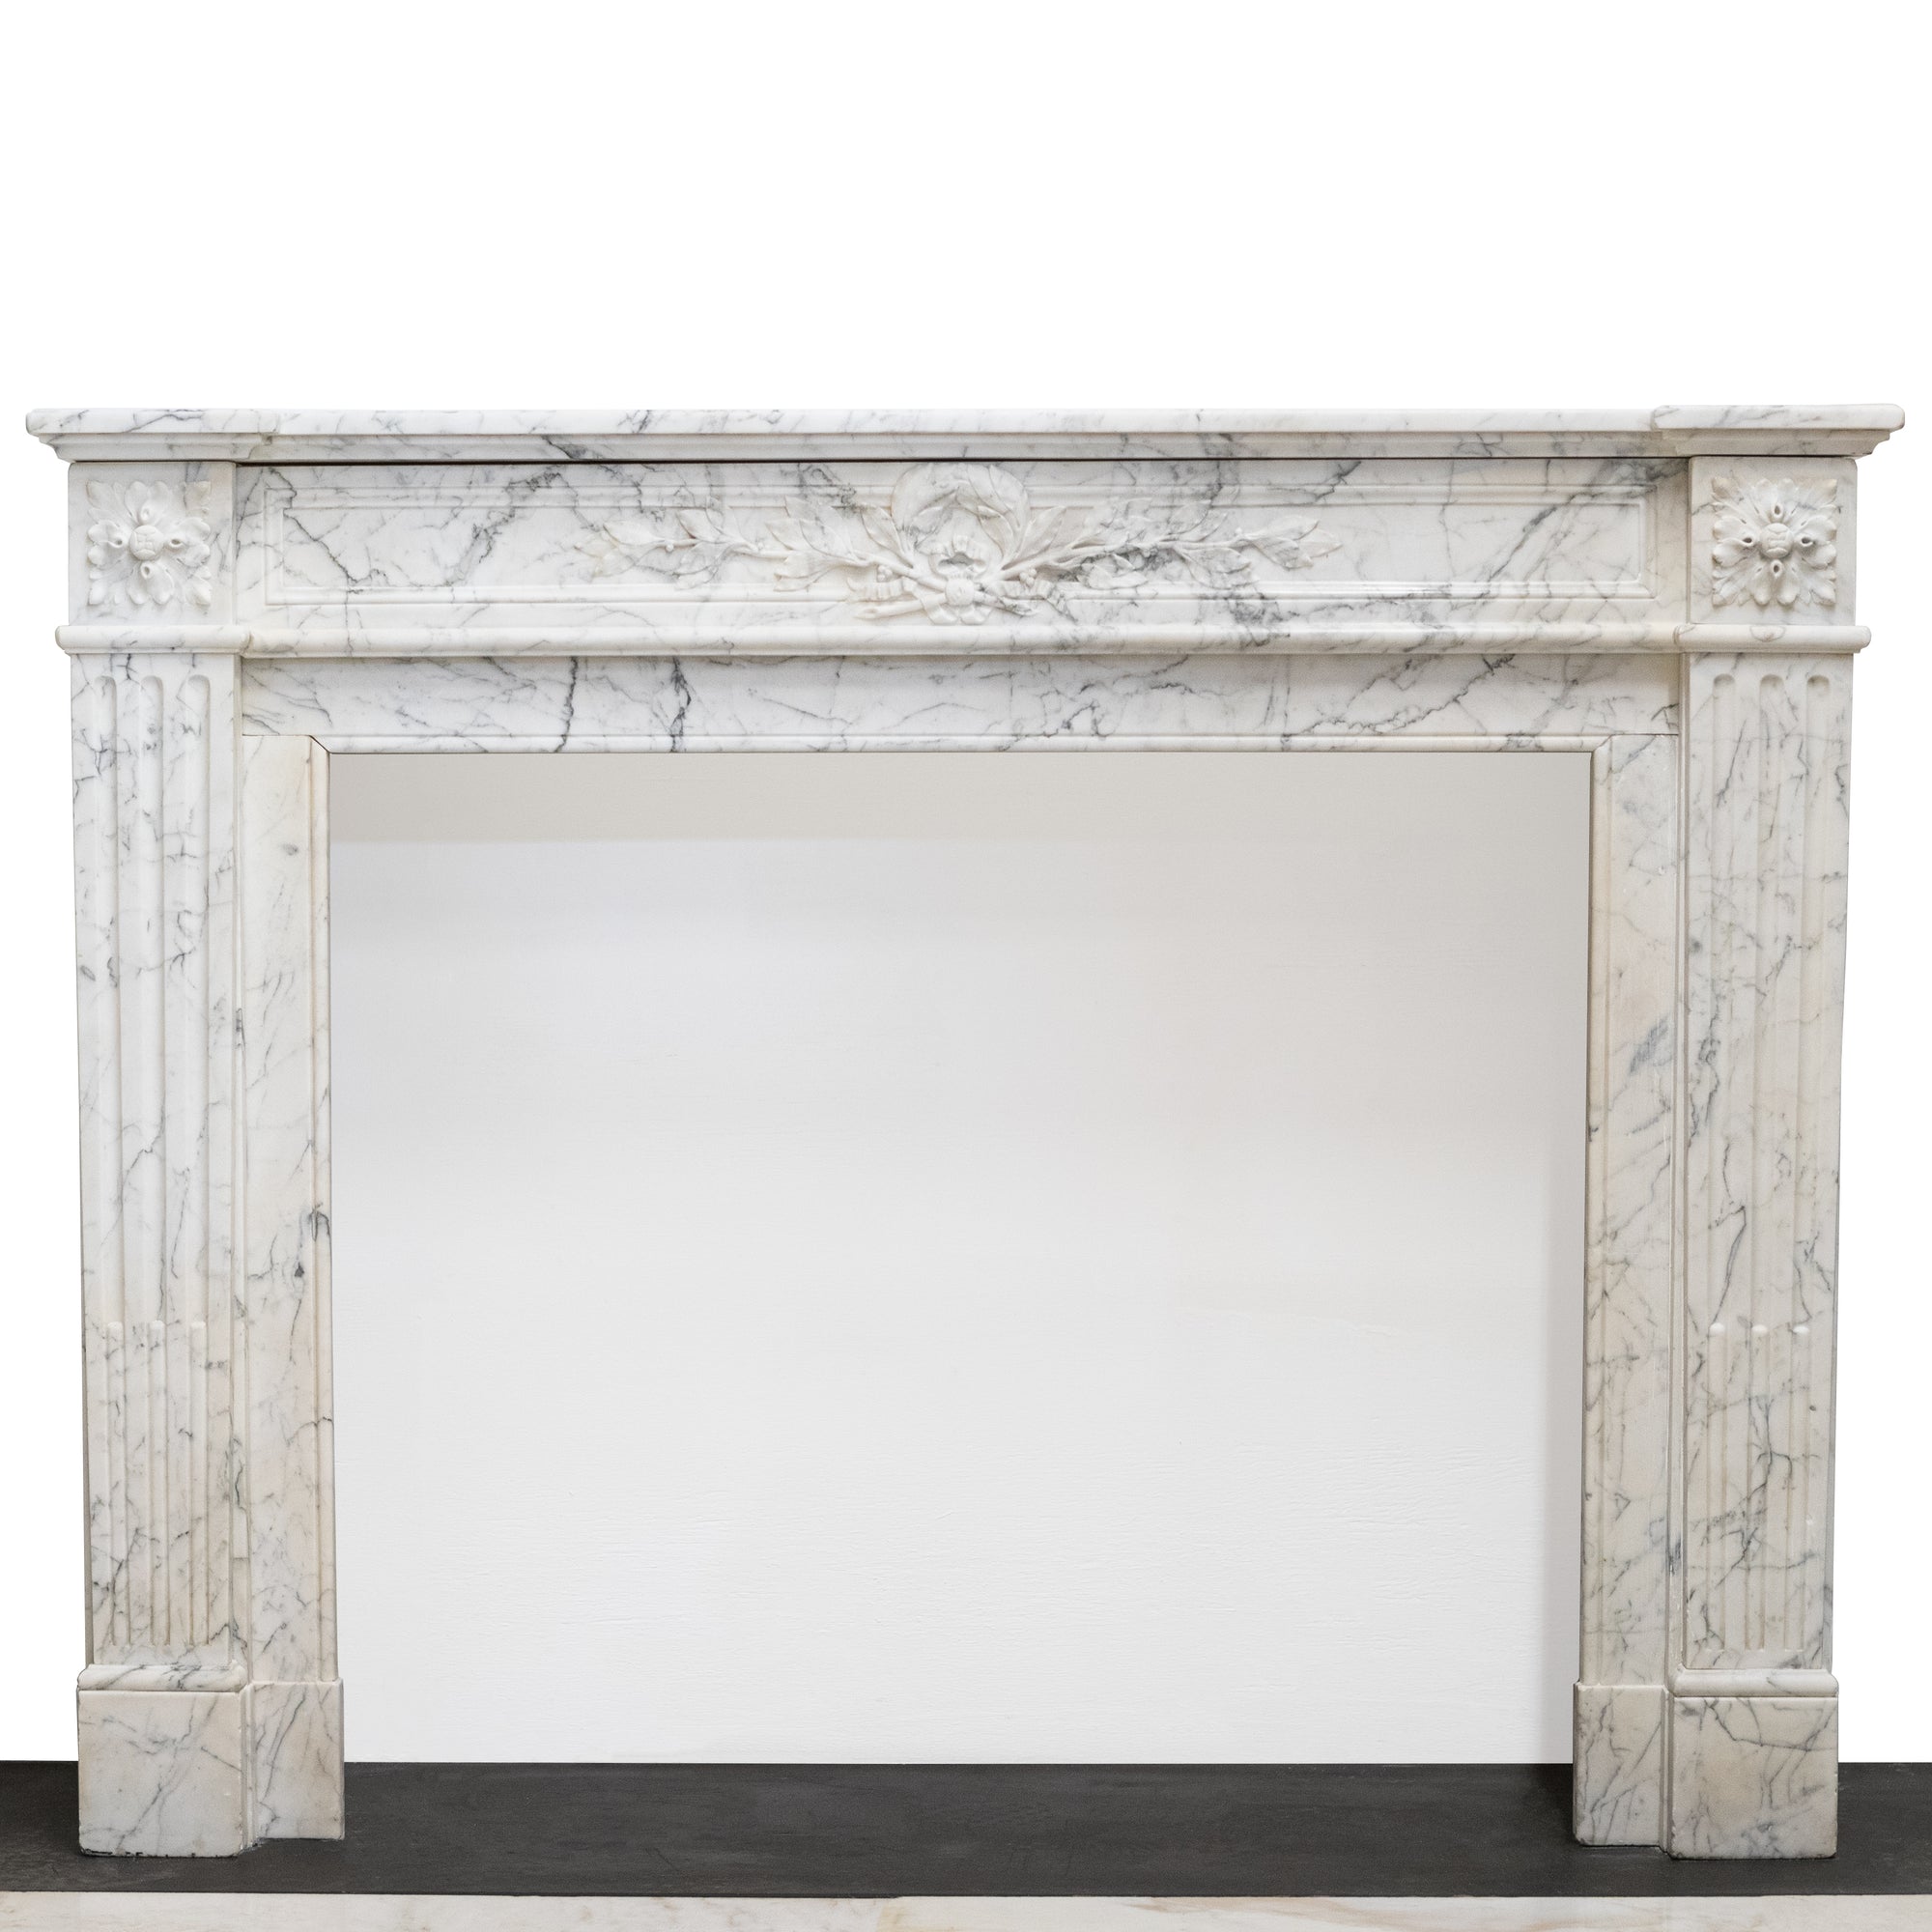 Antique Louis XVI Style Italian Marble Fireplace in Carrara Marble | The Architectural Forum